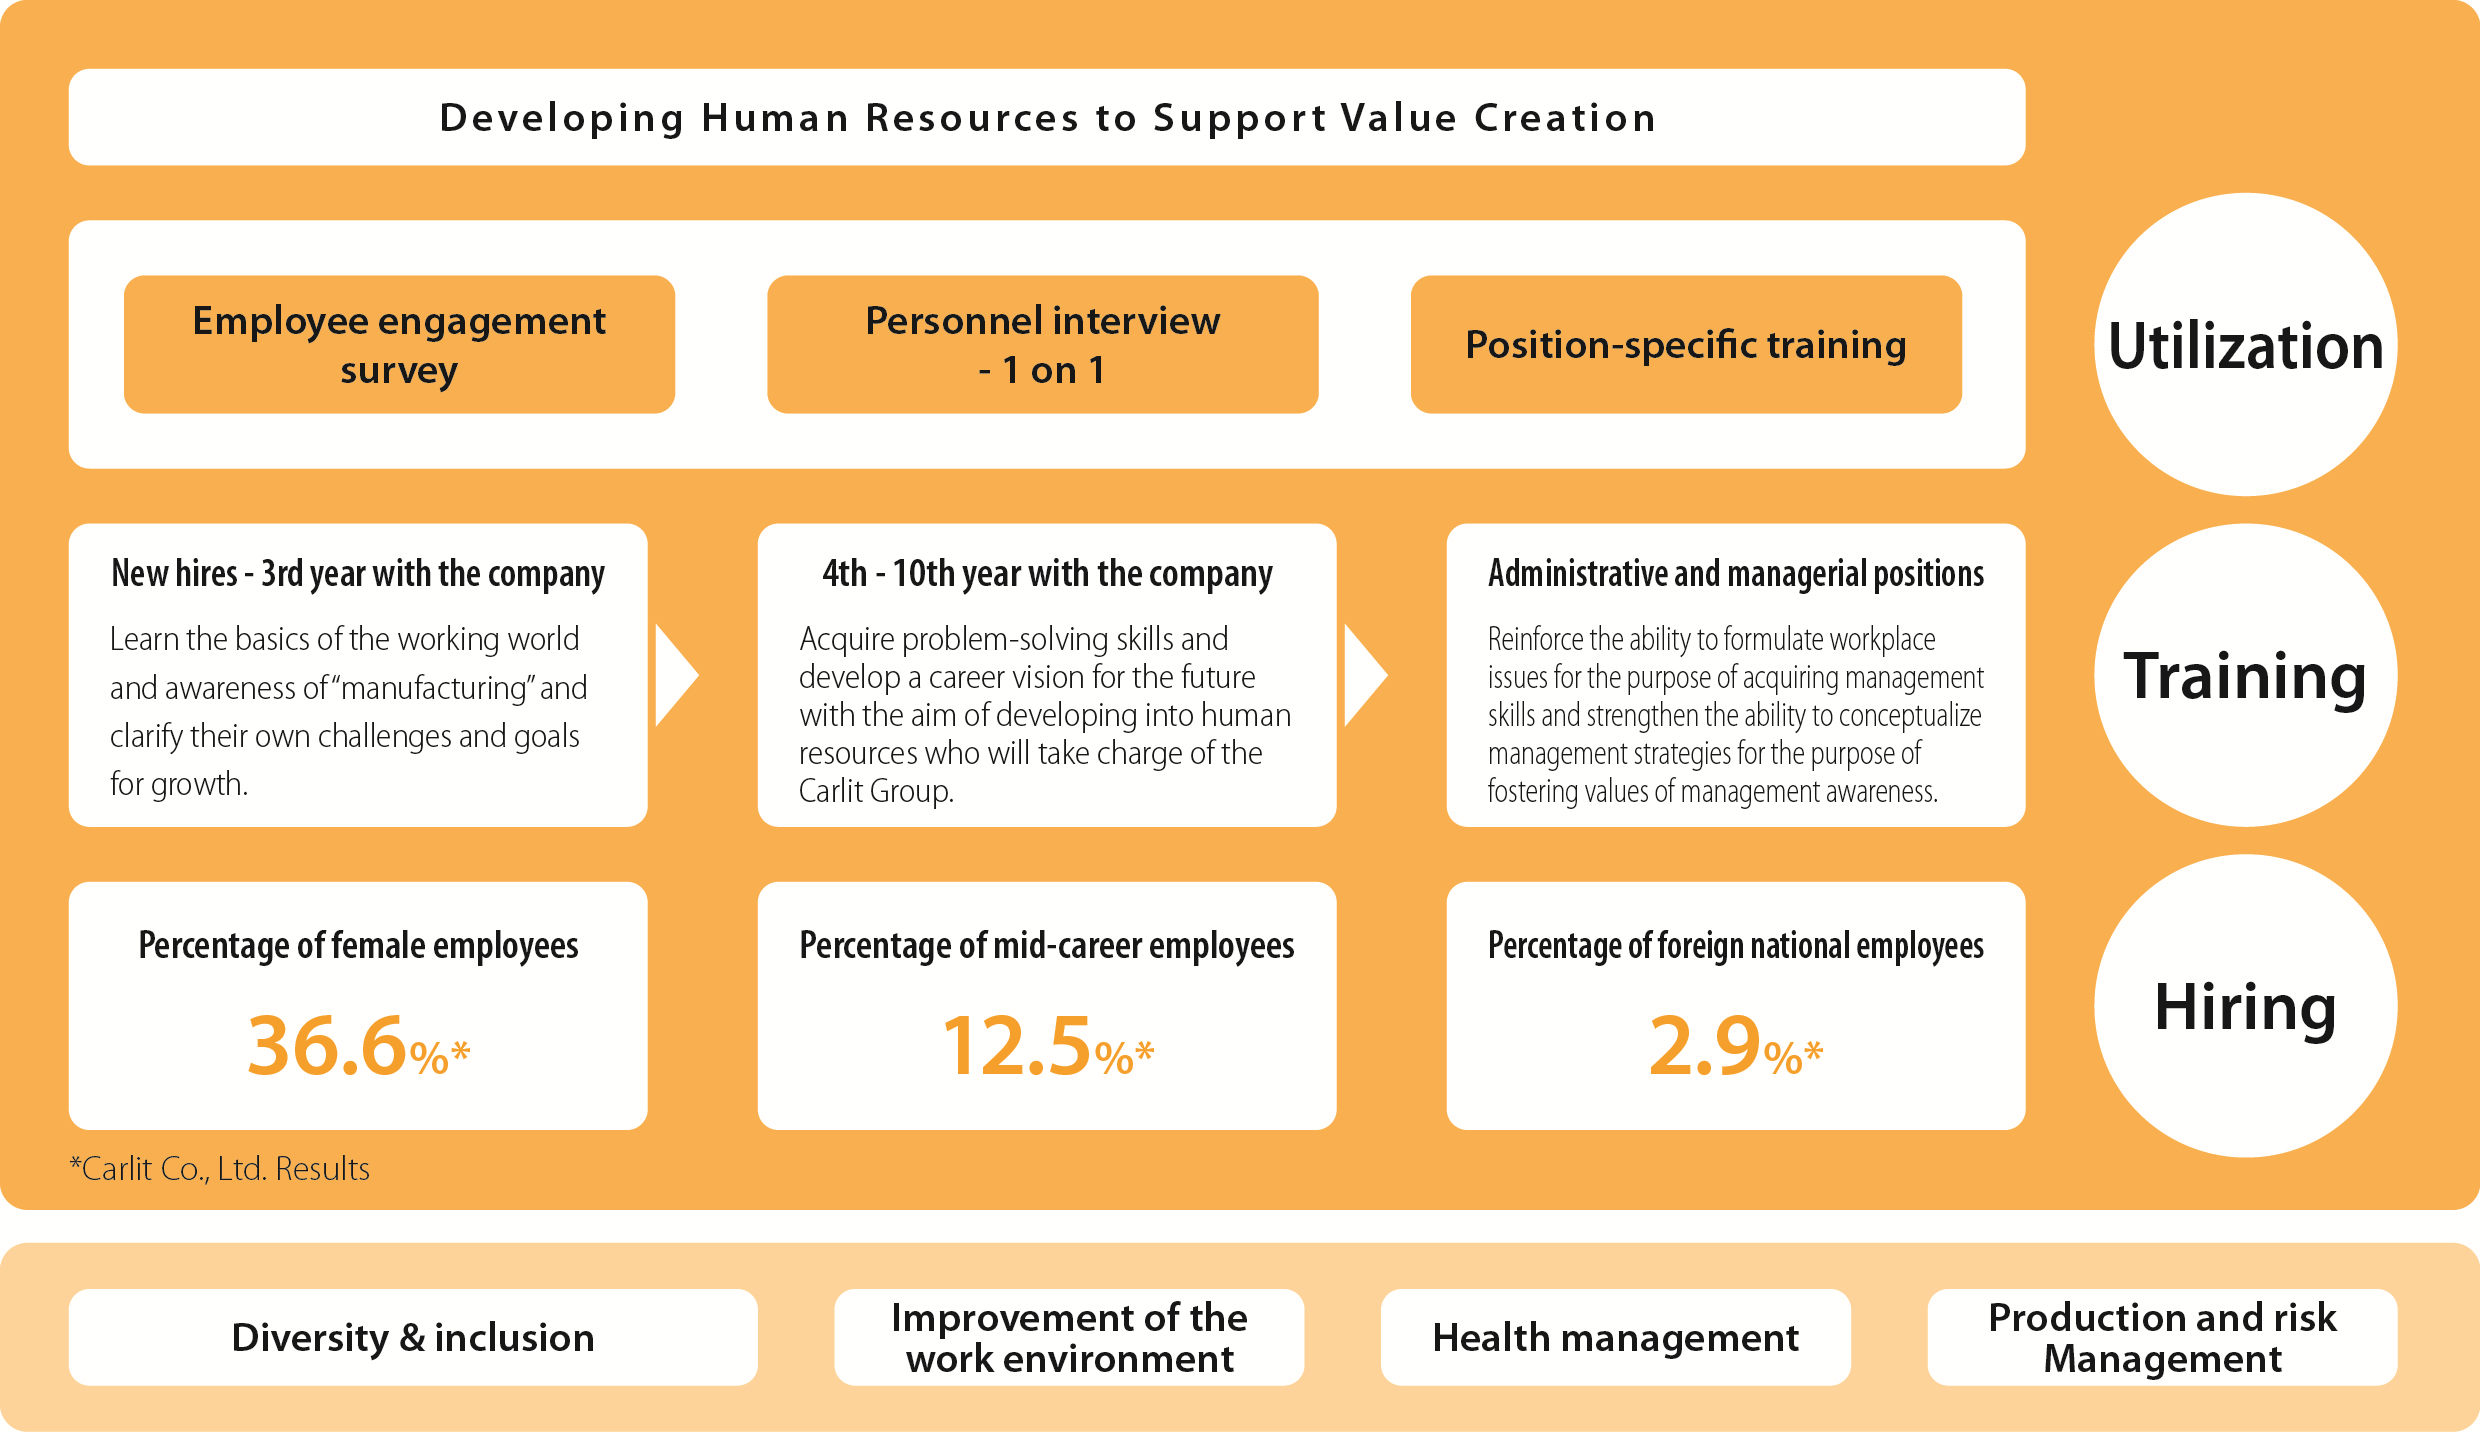 Developing Human Resources to Support Value Creation